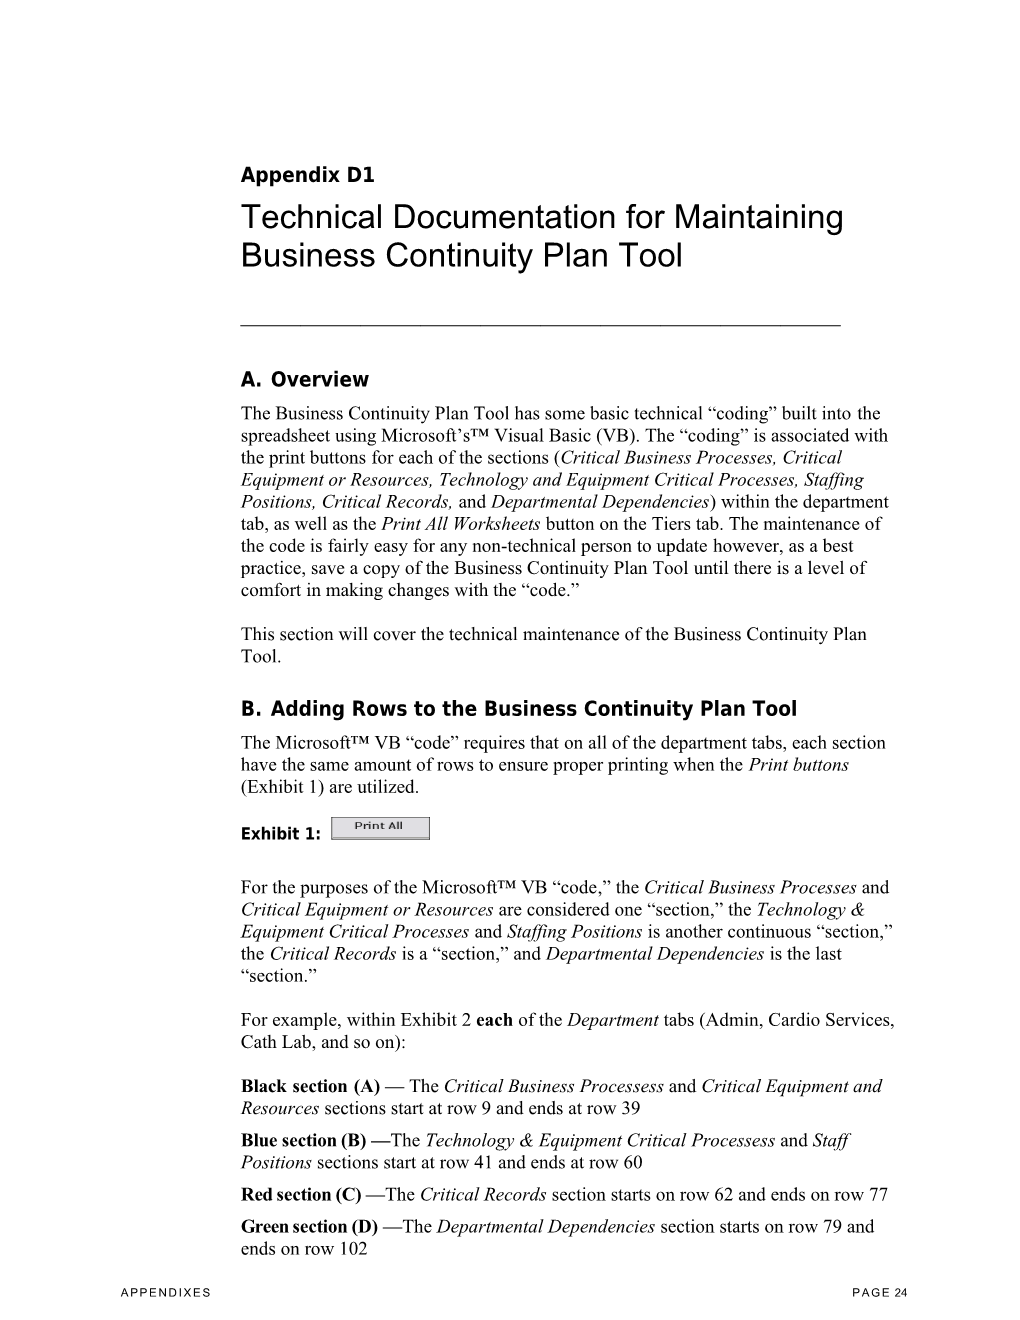 Technical Documentation for Maintaining Business Continuity Plan Tool